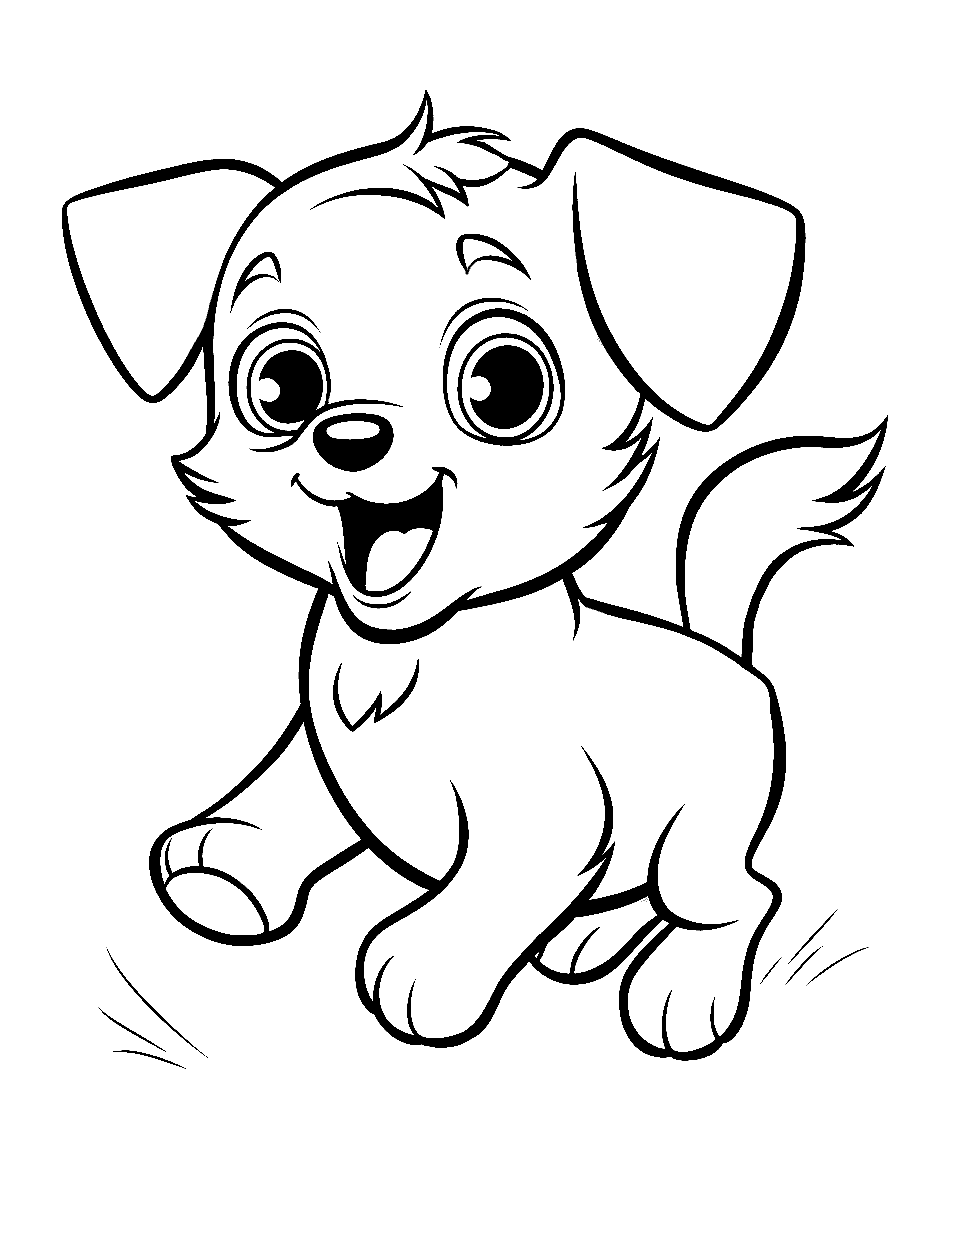 Puppy Play Coloring Page - A puppy running and playing around.